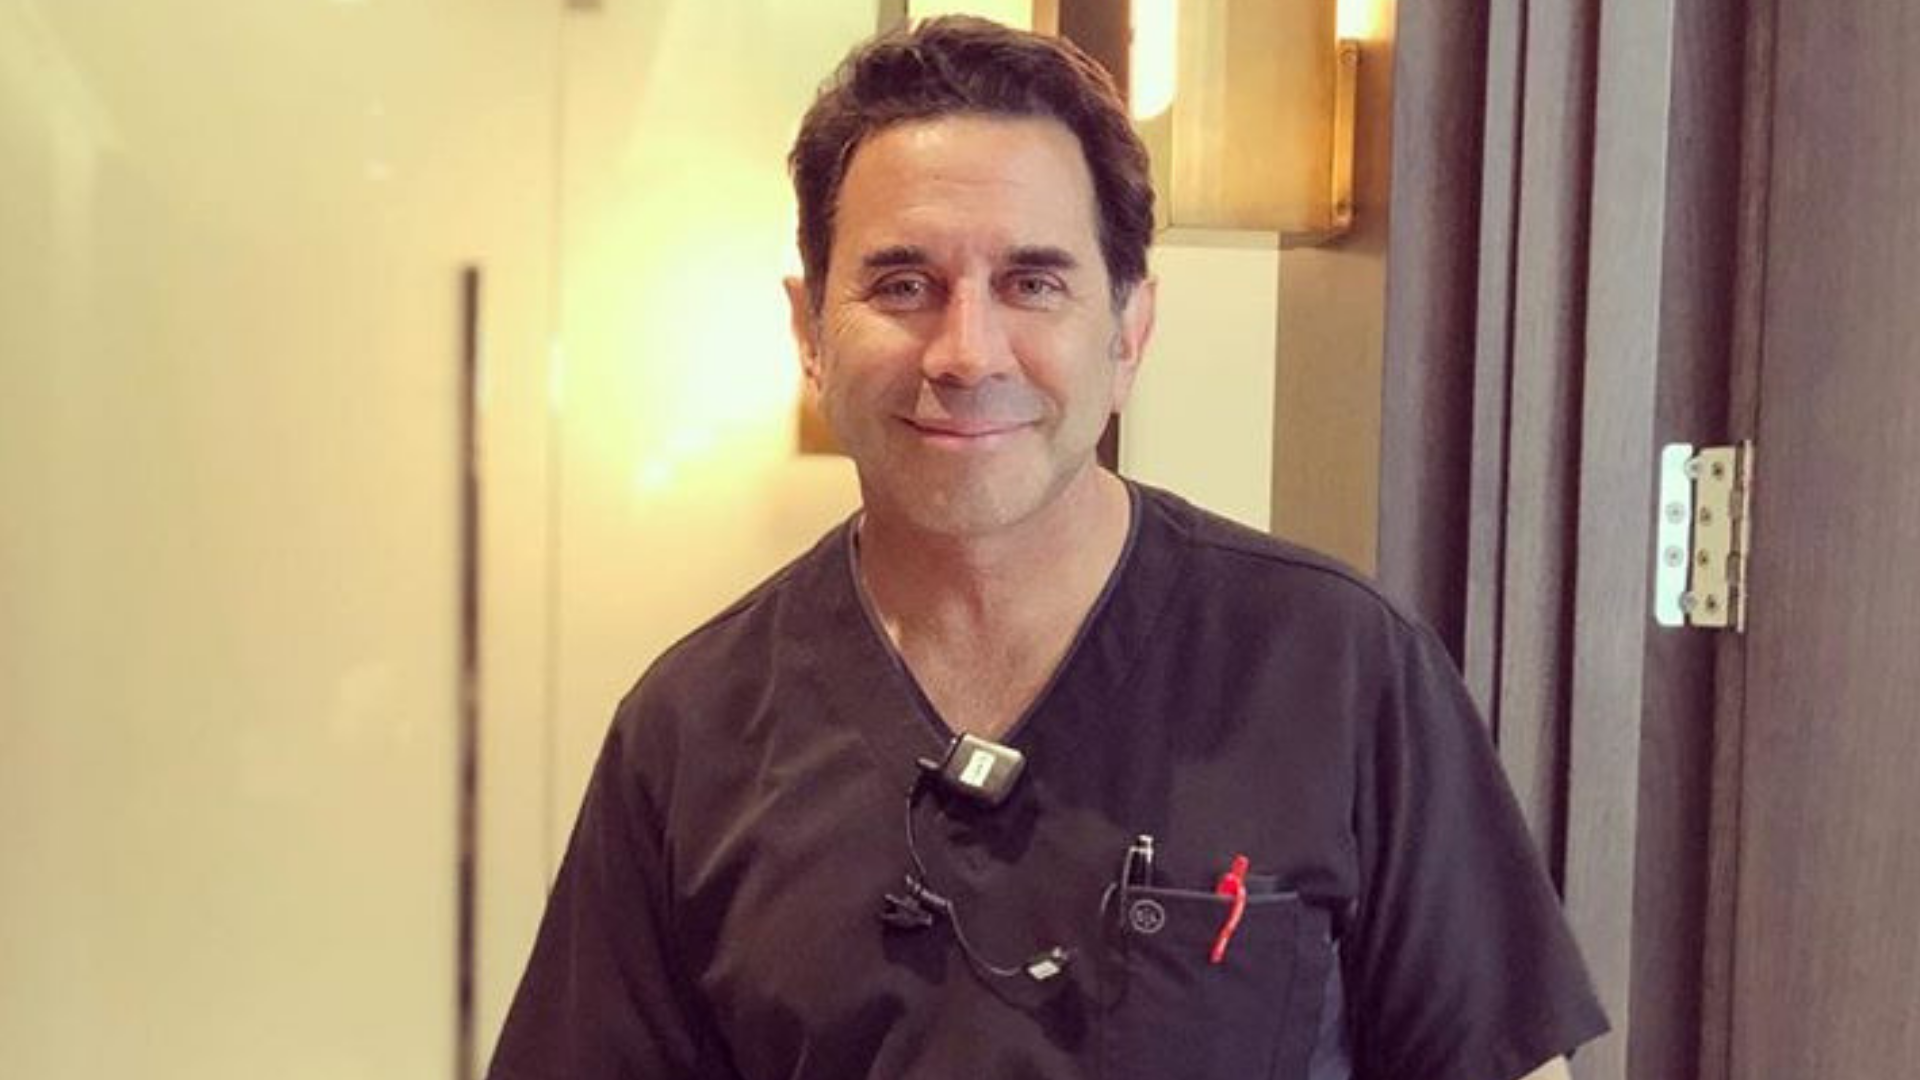 North-West College to Host First SUCCESS Talk Featuring Plastic Surgeon Dr. Paul  Nassif, Star of Botched on E! TV - Success Education Colleges